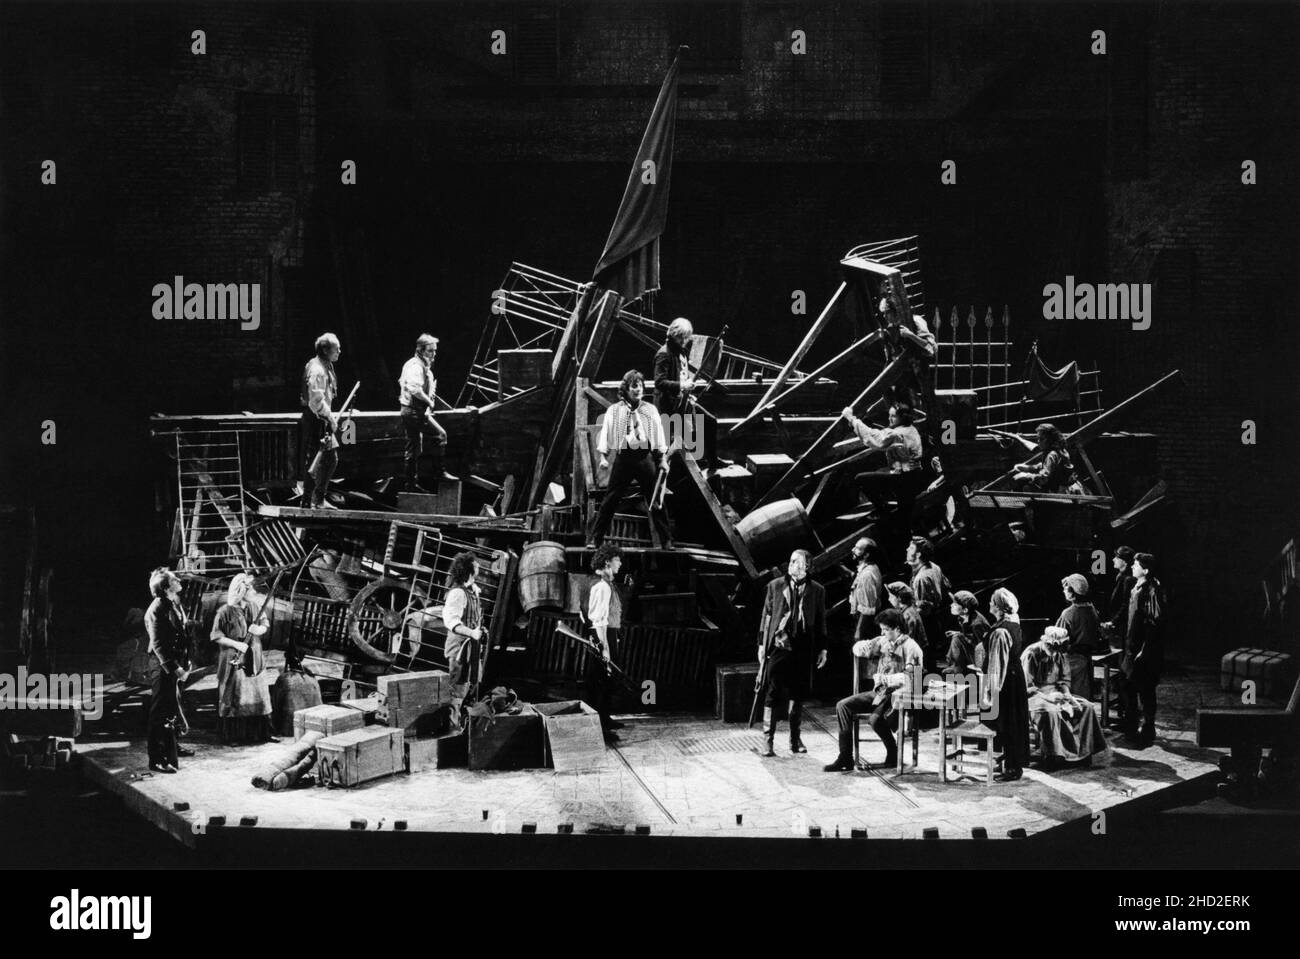 original London cast - revolutionaries at the barricades with (centre) David Burt (Enjoiras), stage right centre: Roger Allam (Javert) in LES MISERABLES at the Barbican Theatre, London EC2 08/10/1985   music: Claude-Michel Schonberg  text: Herbert Kretzmer  original text by Alain Boubil & Jean-Marc Natel   additional material: James Fenton  based on the novel by Victor Hugo  adapted & directed by Trevor Nunn & John Caird  set design: John Napier  costumes: Andreane Neofitou  lighting: David Hersey  a Royal Shakespeare Company (RSC) & Cameron Mackintosh co-production   transferred to the Palace Stock Photo